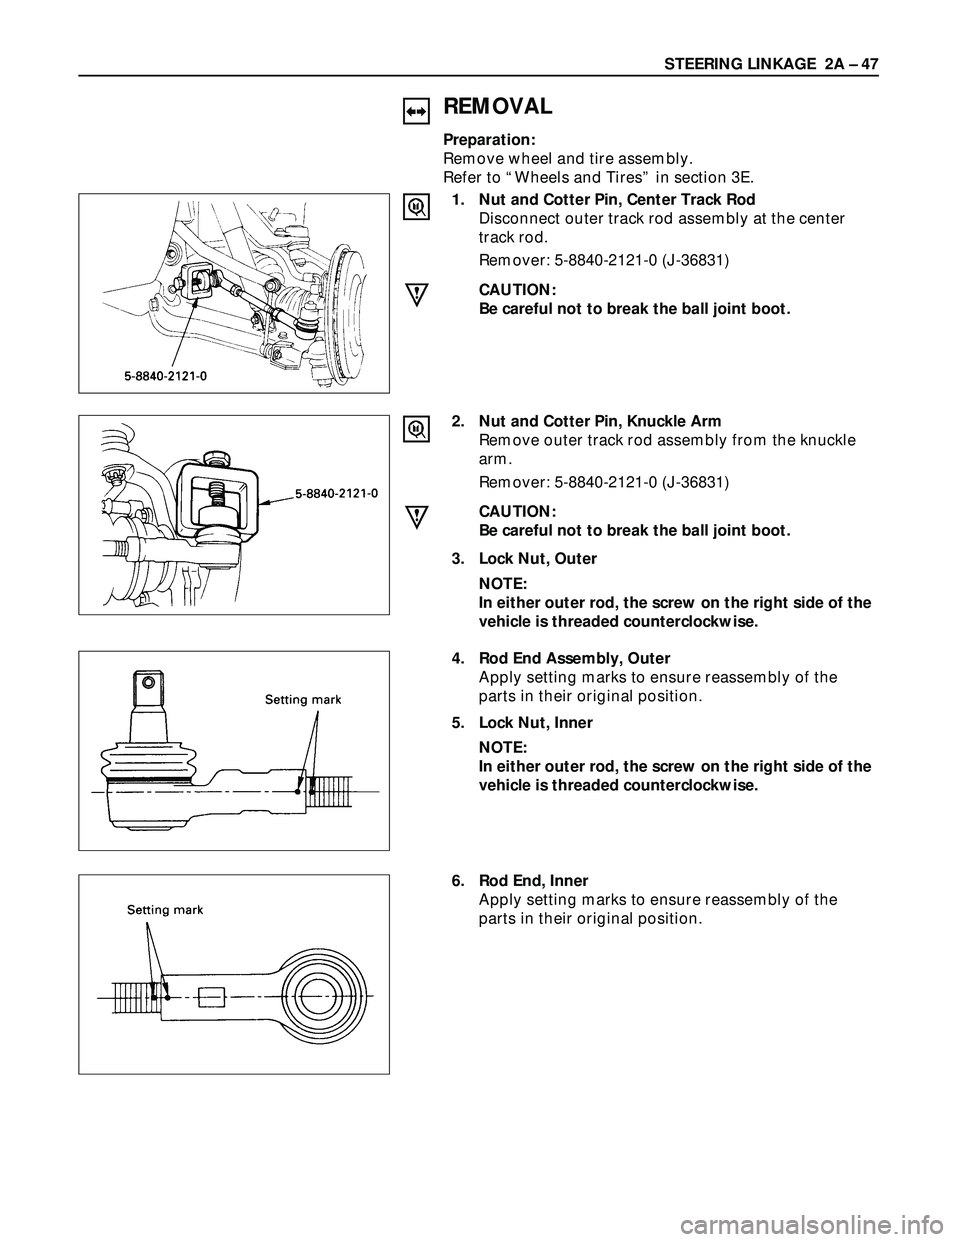 ISUZU TROOPER 1998  Service Repair Manual STEERING LINKAGE  2A – 47
REMOVAL
Preparation:
Remove wheel and tire assembly.
Refer to “Wheels and Tires” in section 3E.
1. Nut and Cotter Pin, Center Track Rod
Disconnect outer track rod assem